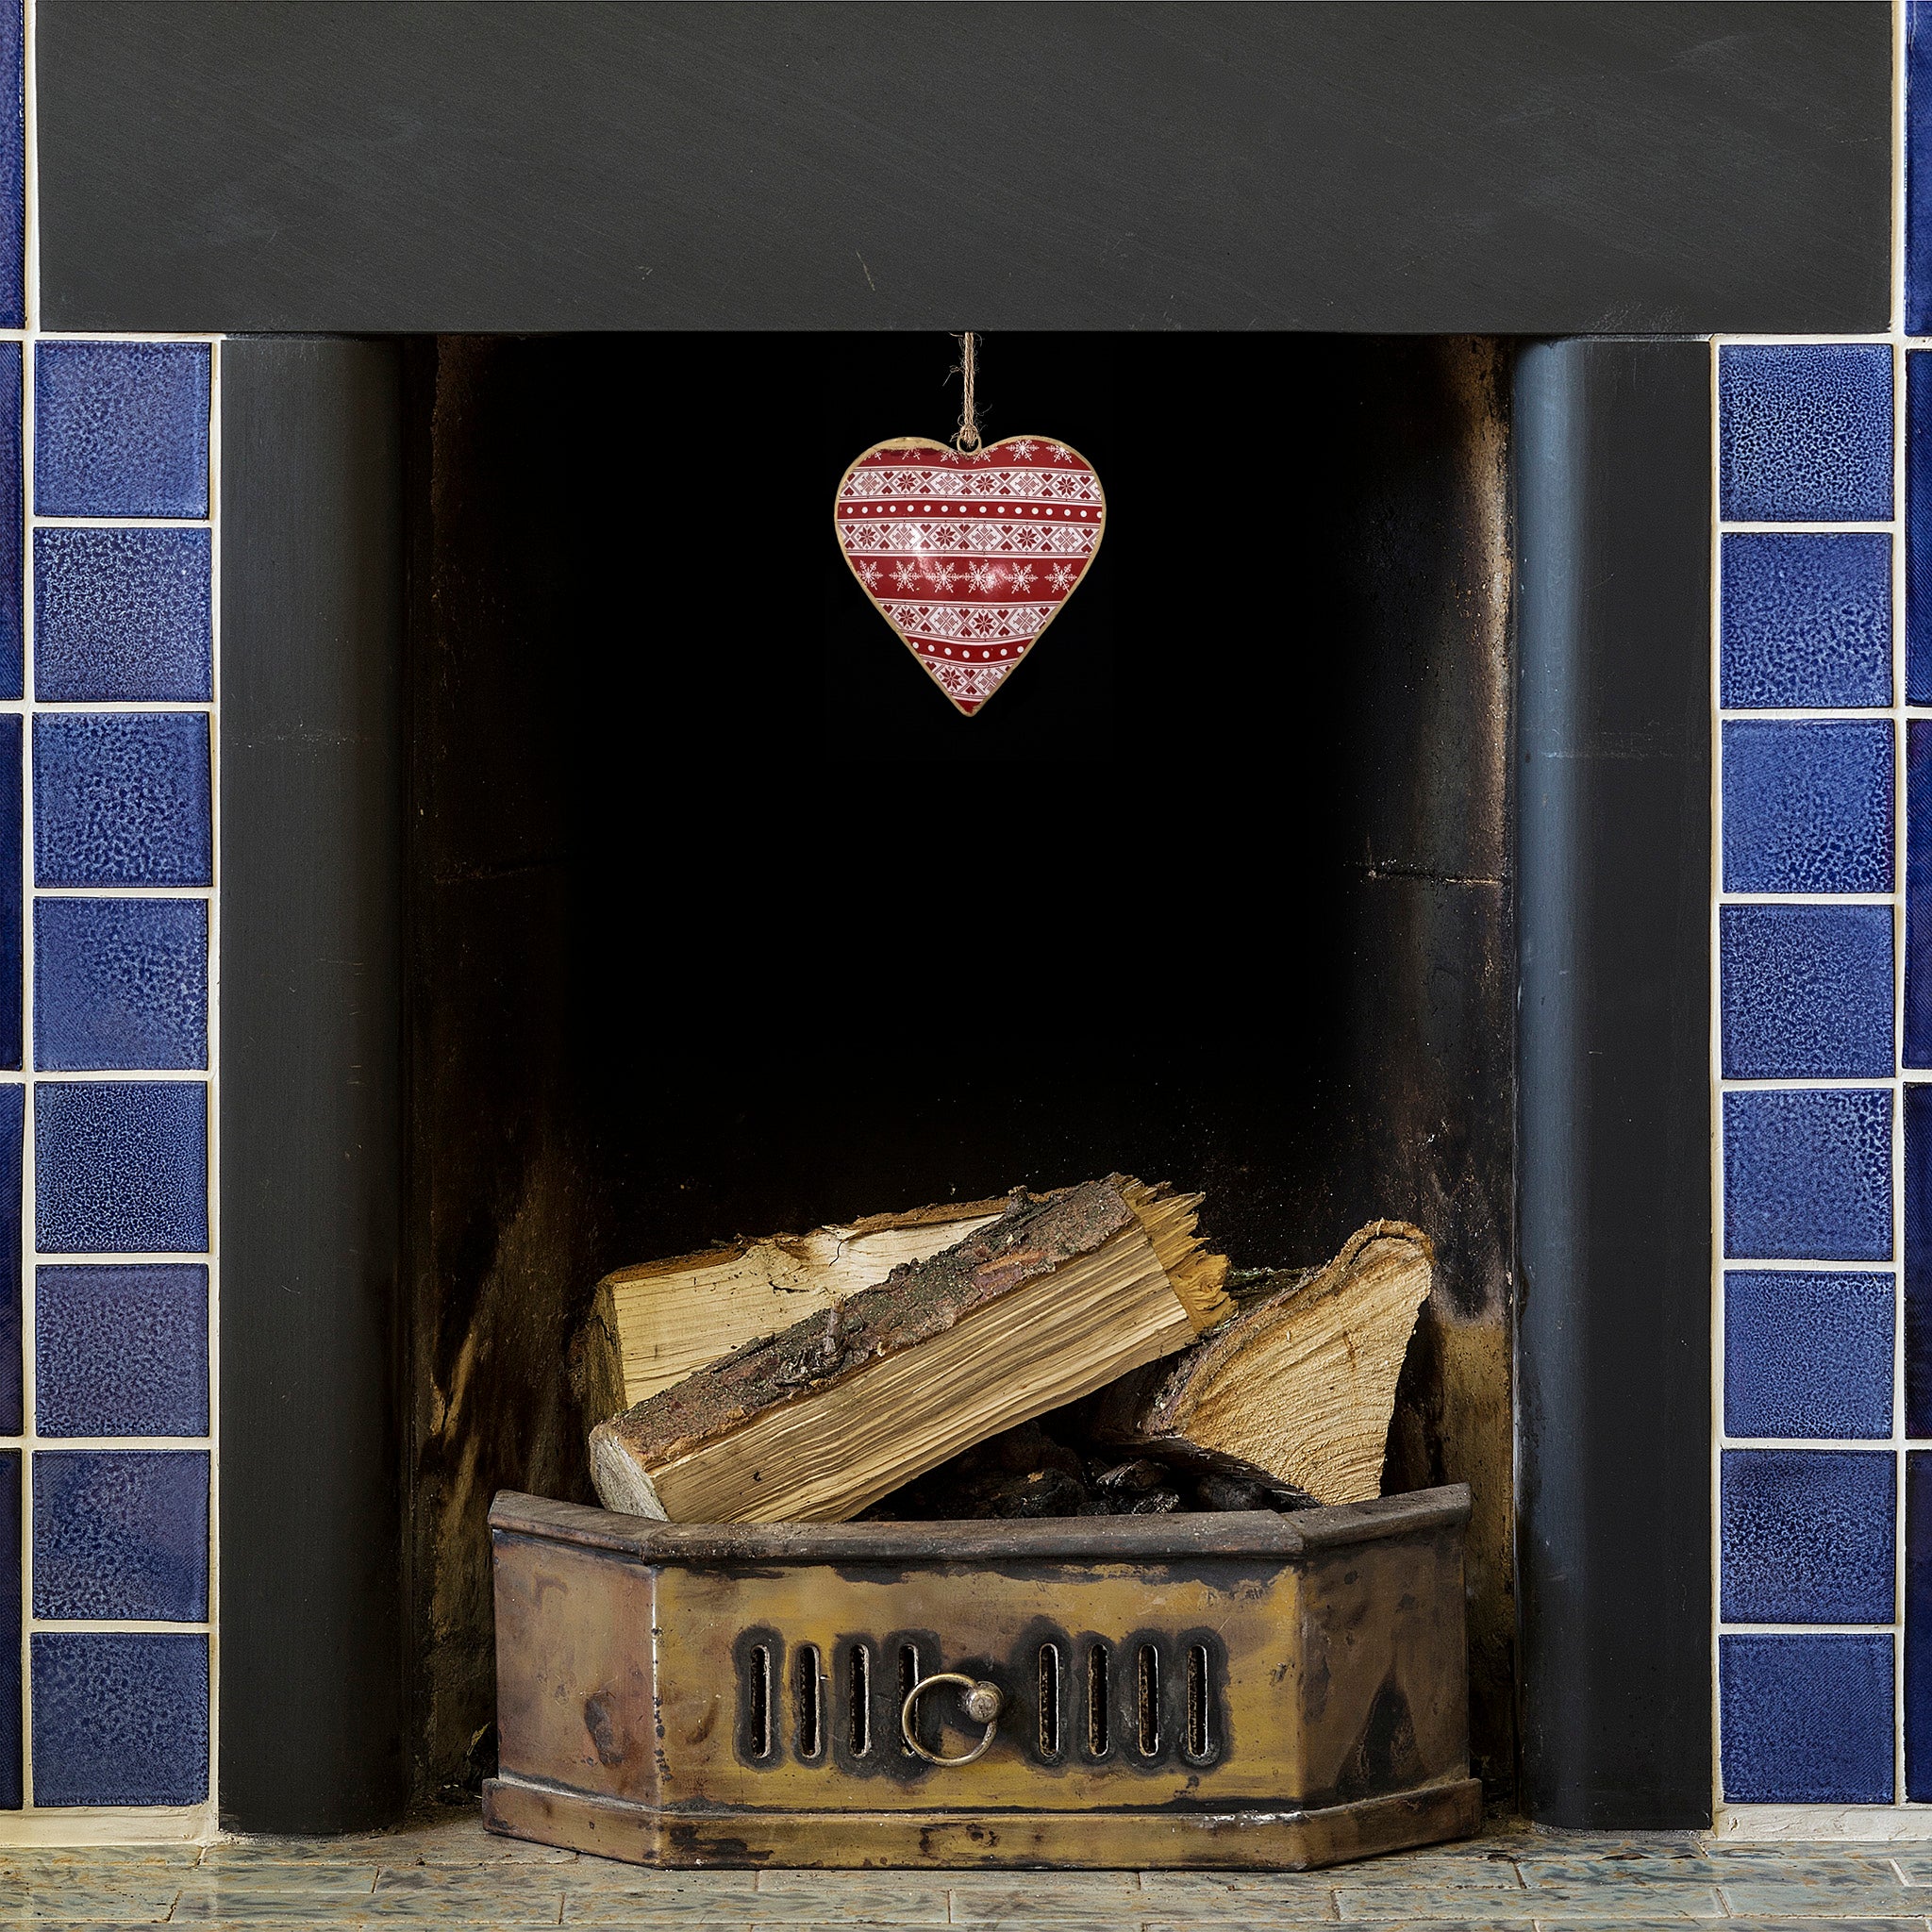 A nordic heart painted dangle in a blue tile fireplace. Includes a winter inspired design.